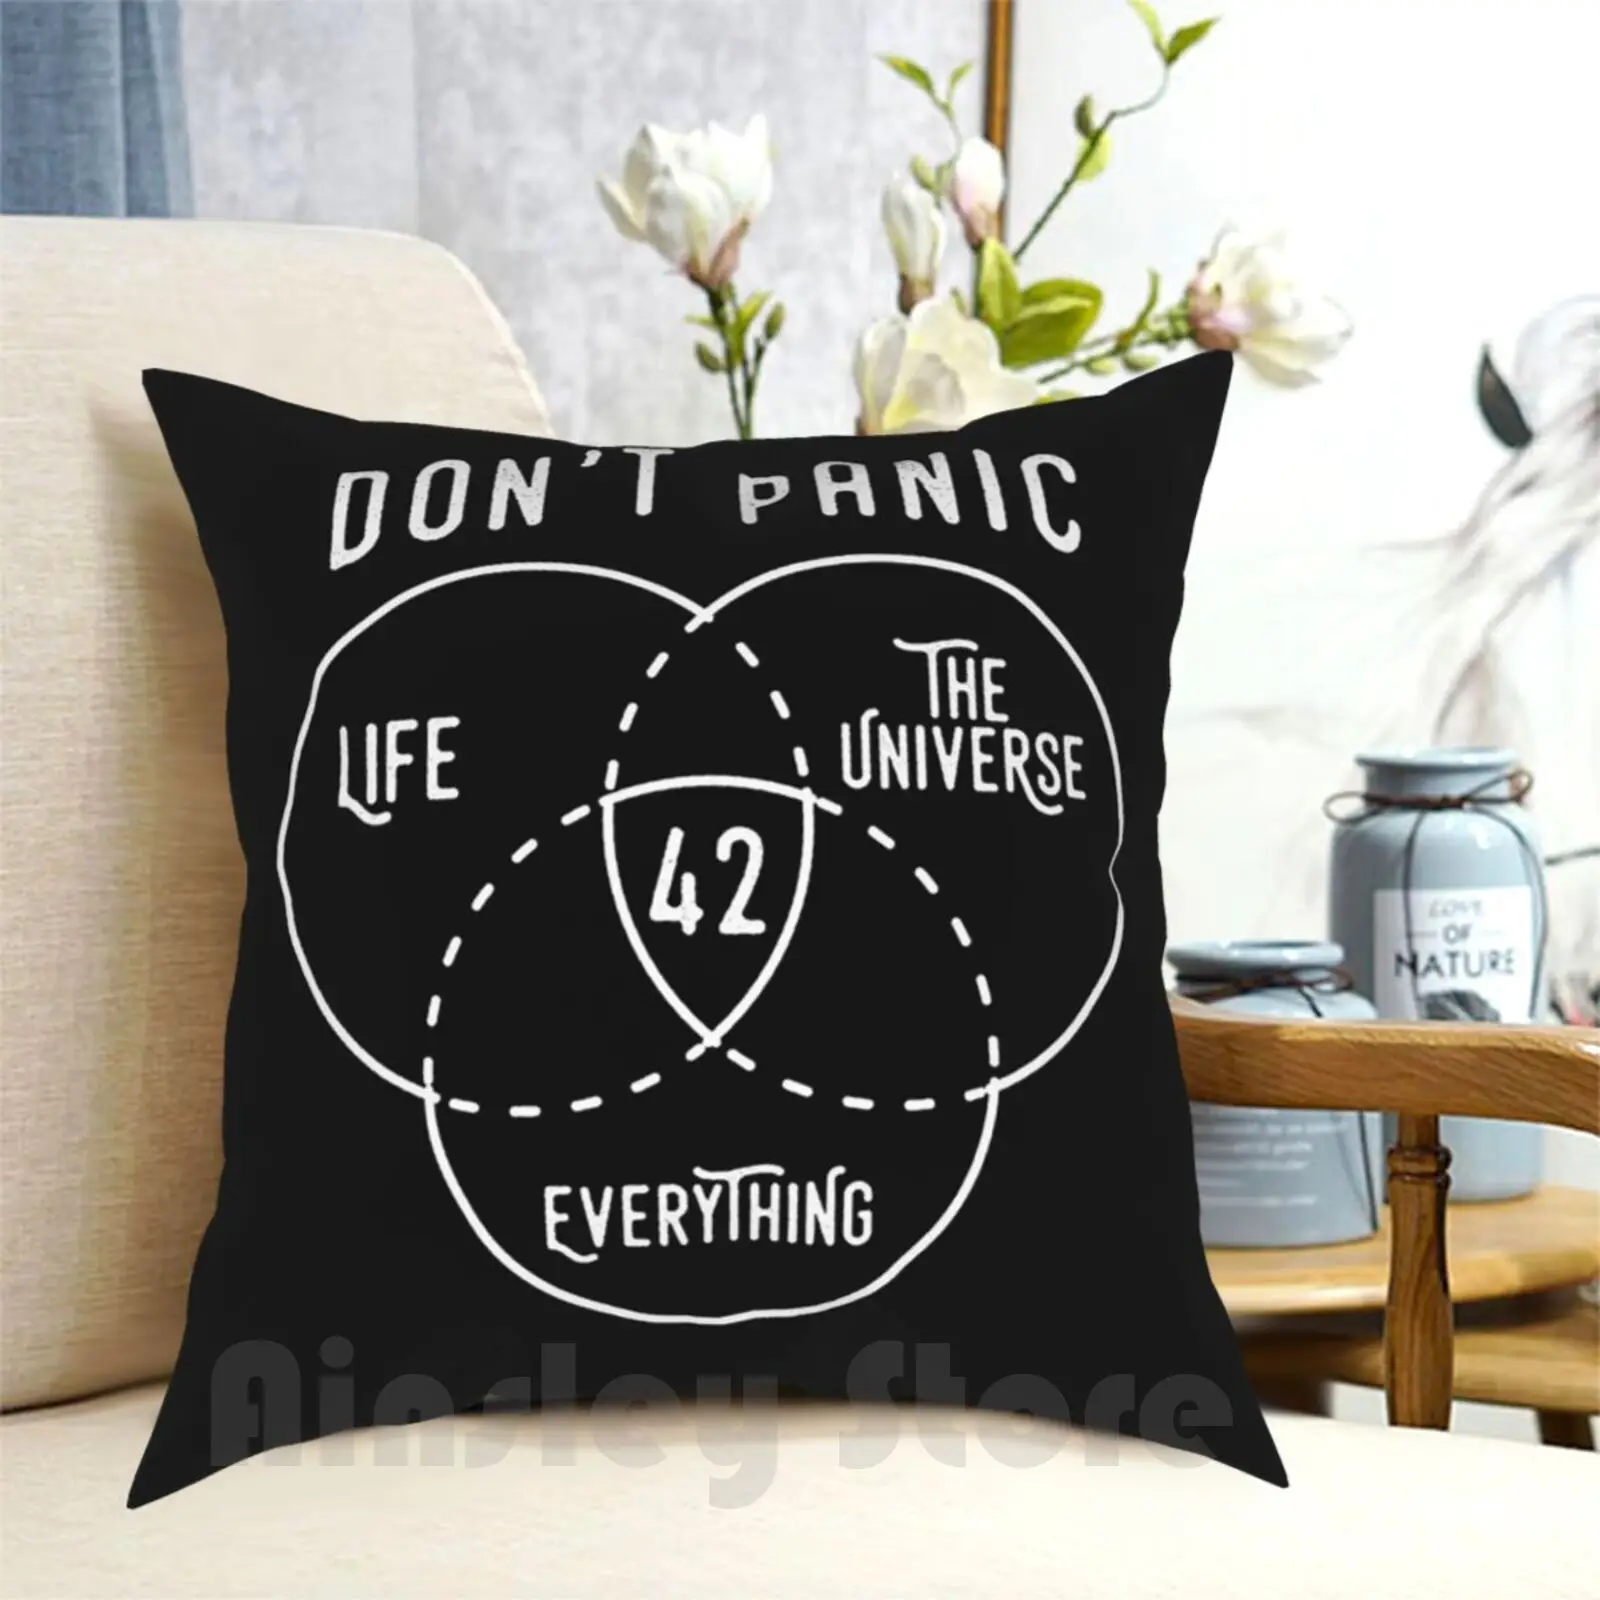 

42 The Answer To Life , Universe , And Everything. Pillow Case Printed Home Soft Throw Pillow Science Fiction Galaxy